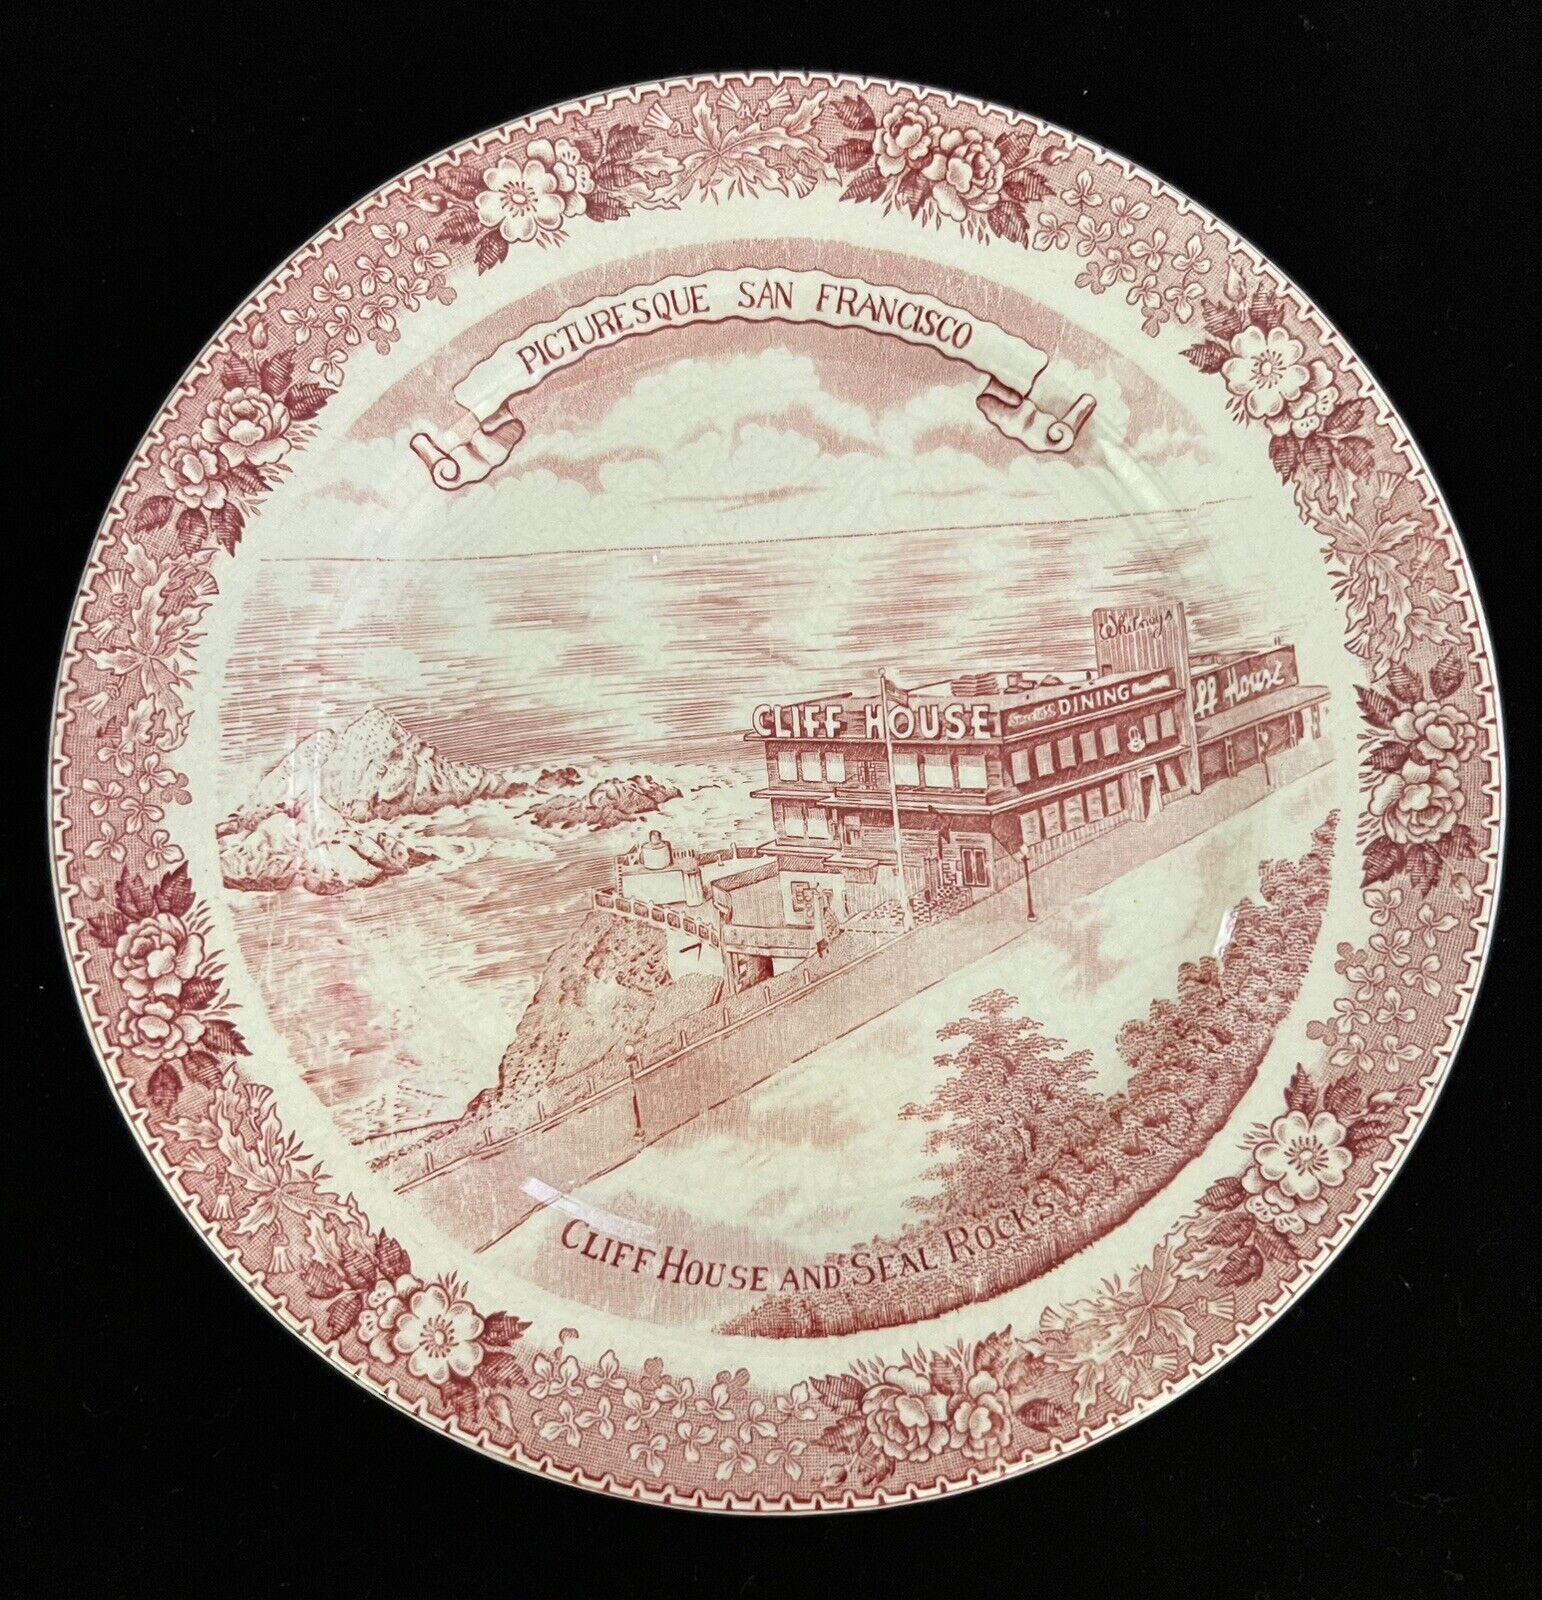 San Francisco Cliff House Commemorative 7” Plate Old English Stafforshire Ware